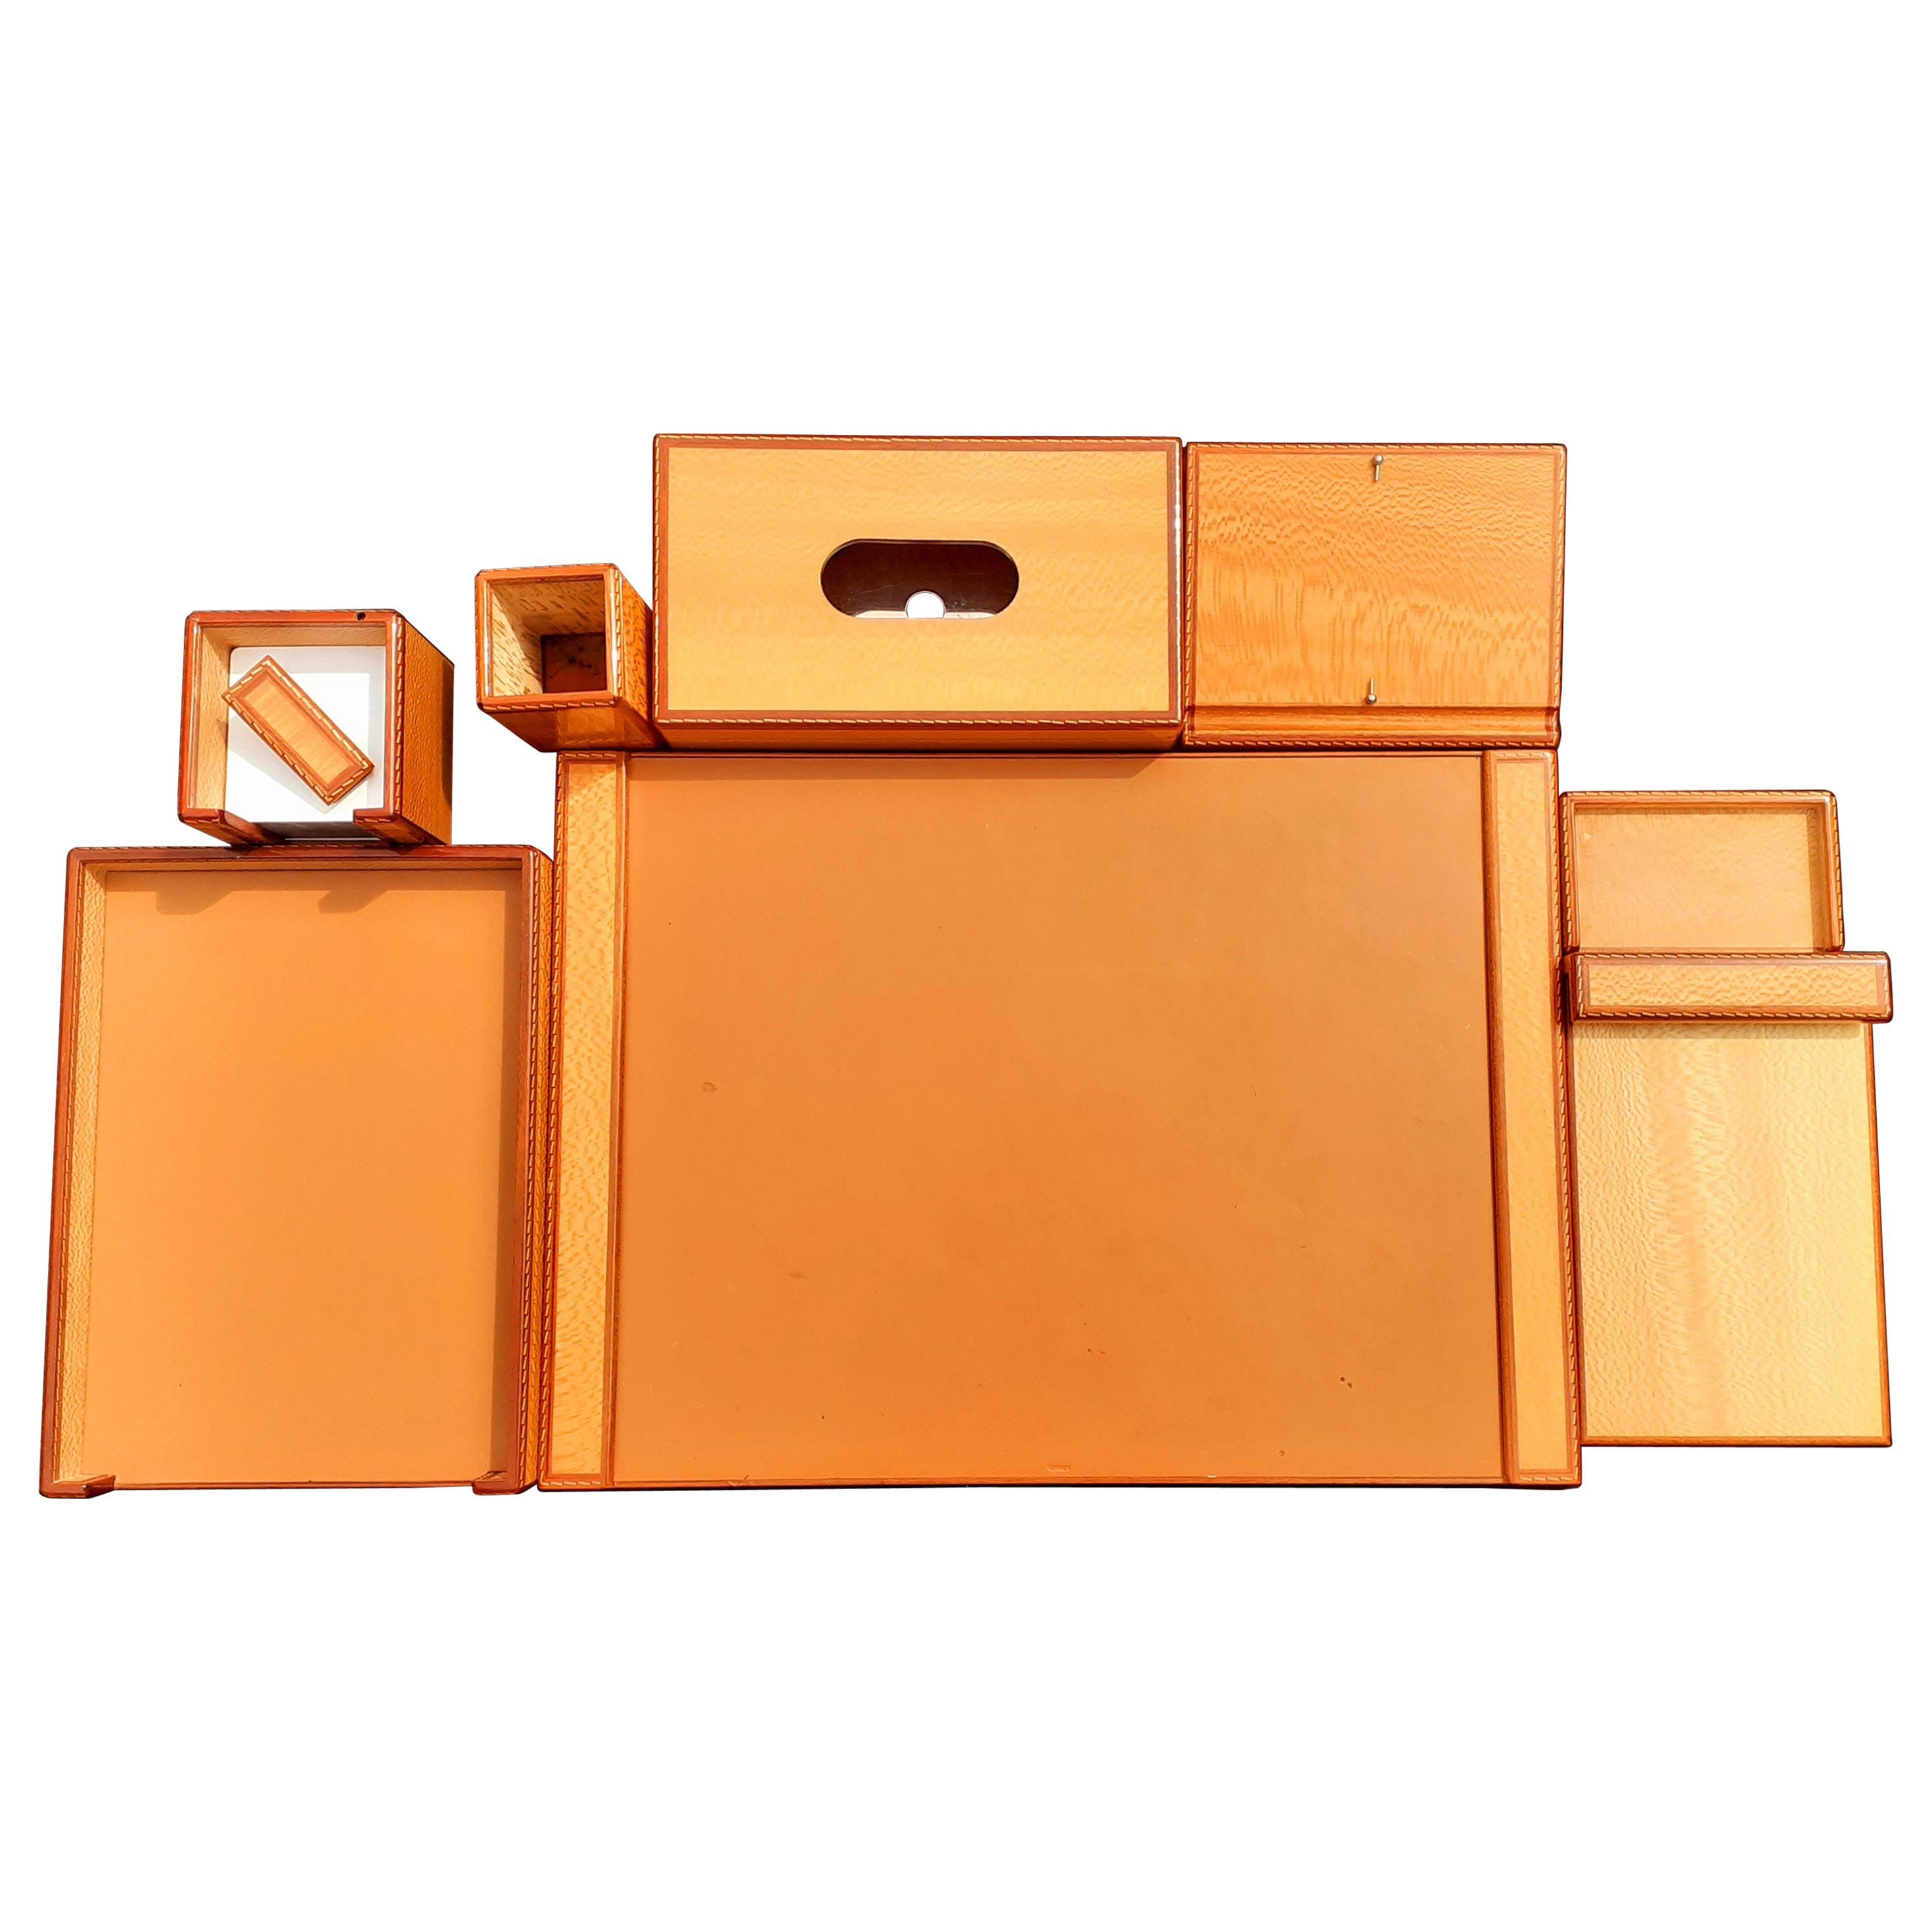 Exceptional Hermès 9 Pieces Desk Set in Lacquered Wood RARE